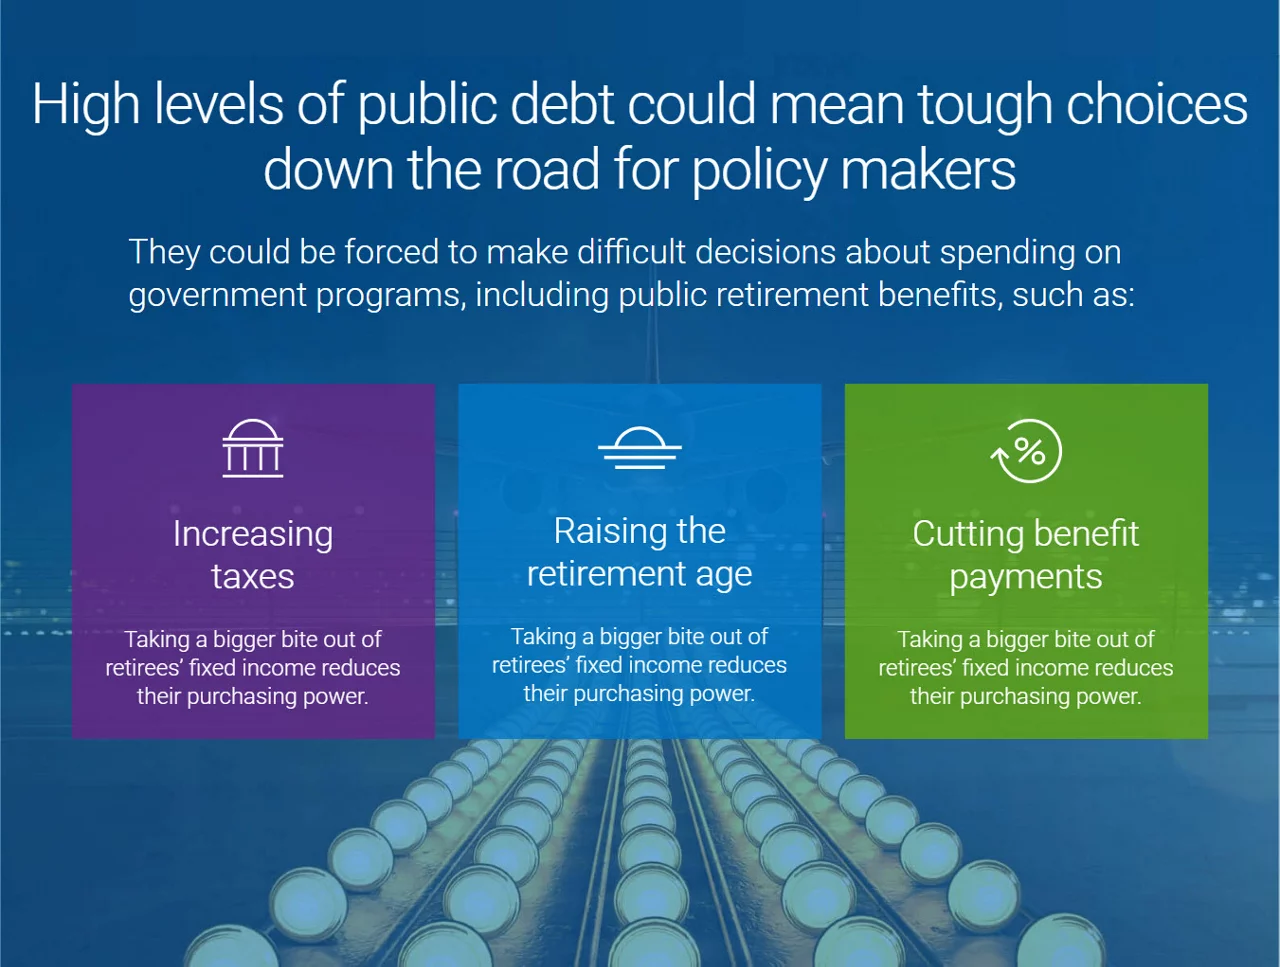 High levels of public debt leads to tough choices for policy makers: increasing taxes, raising the retirement age, and cutting benefit payments.